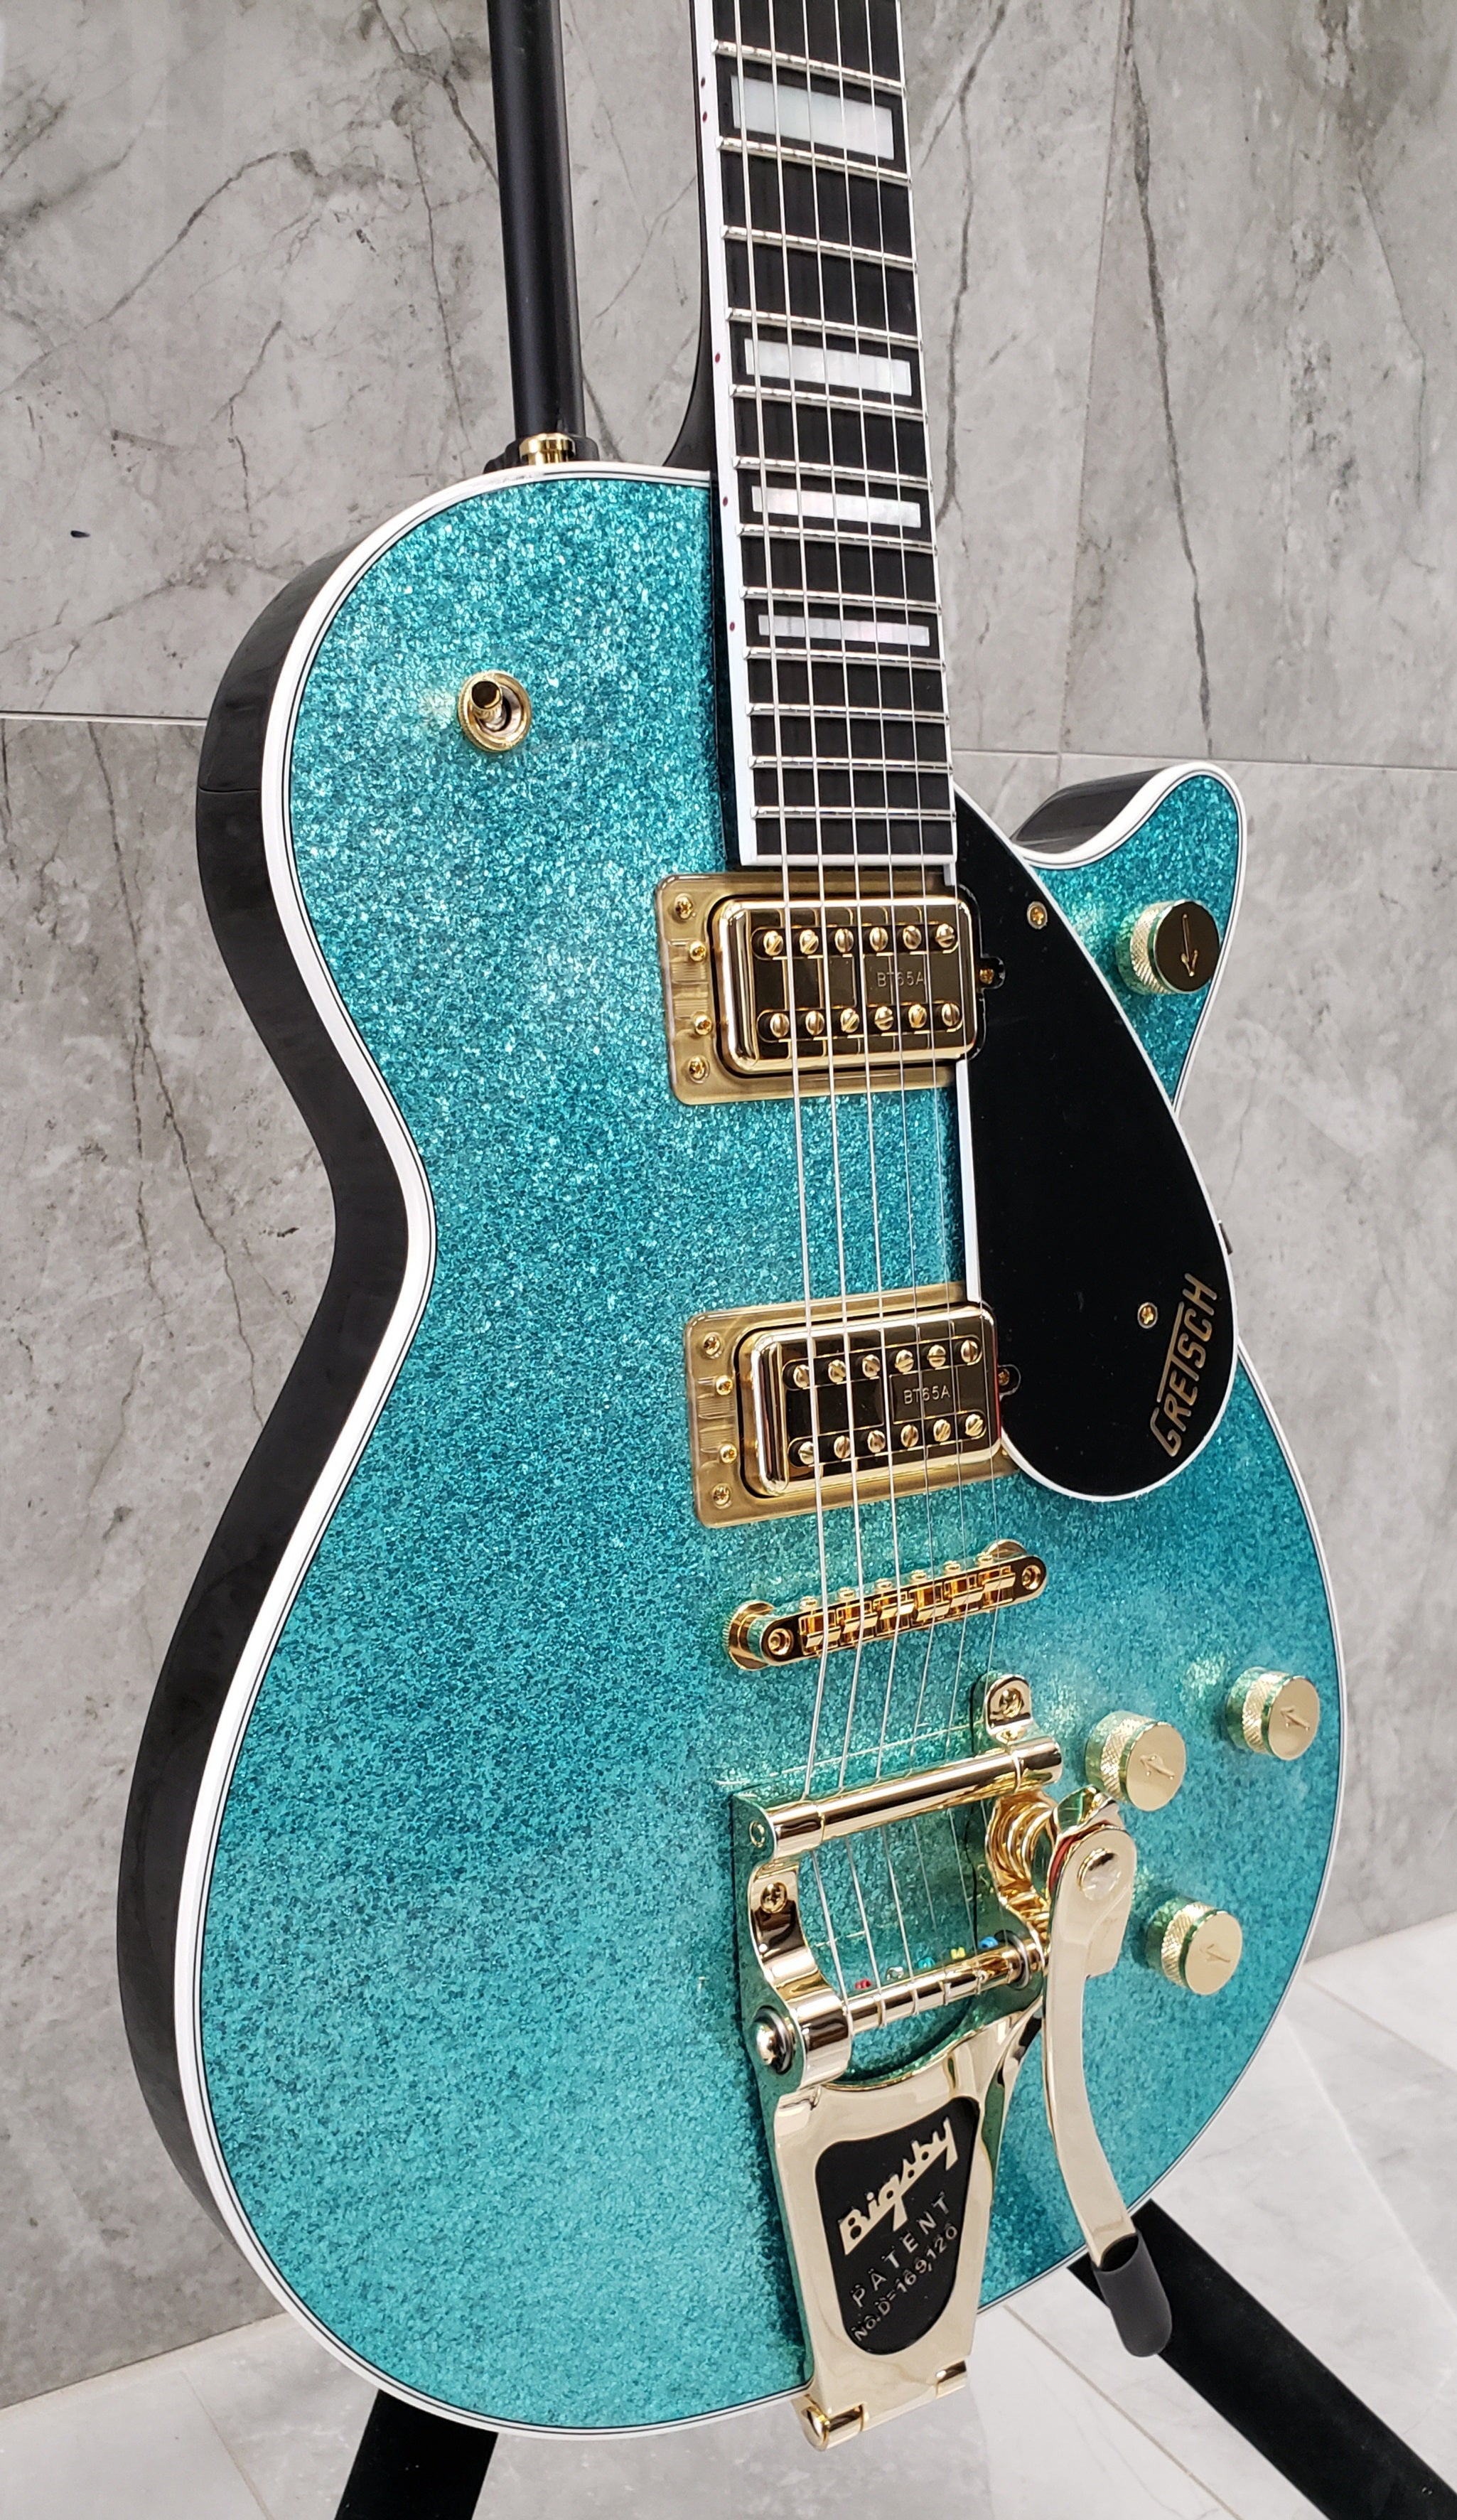 GRETSCH G6229TG Limited Edition Players Edition Sparkle Jet BT with Bigsby Ocean Turquoise Sparkle 2403410813 SERIAL NUMBER JT21114799 - 8.6 LBS